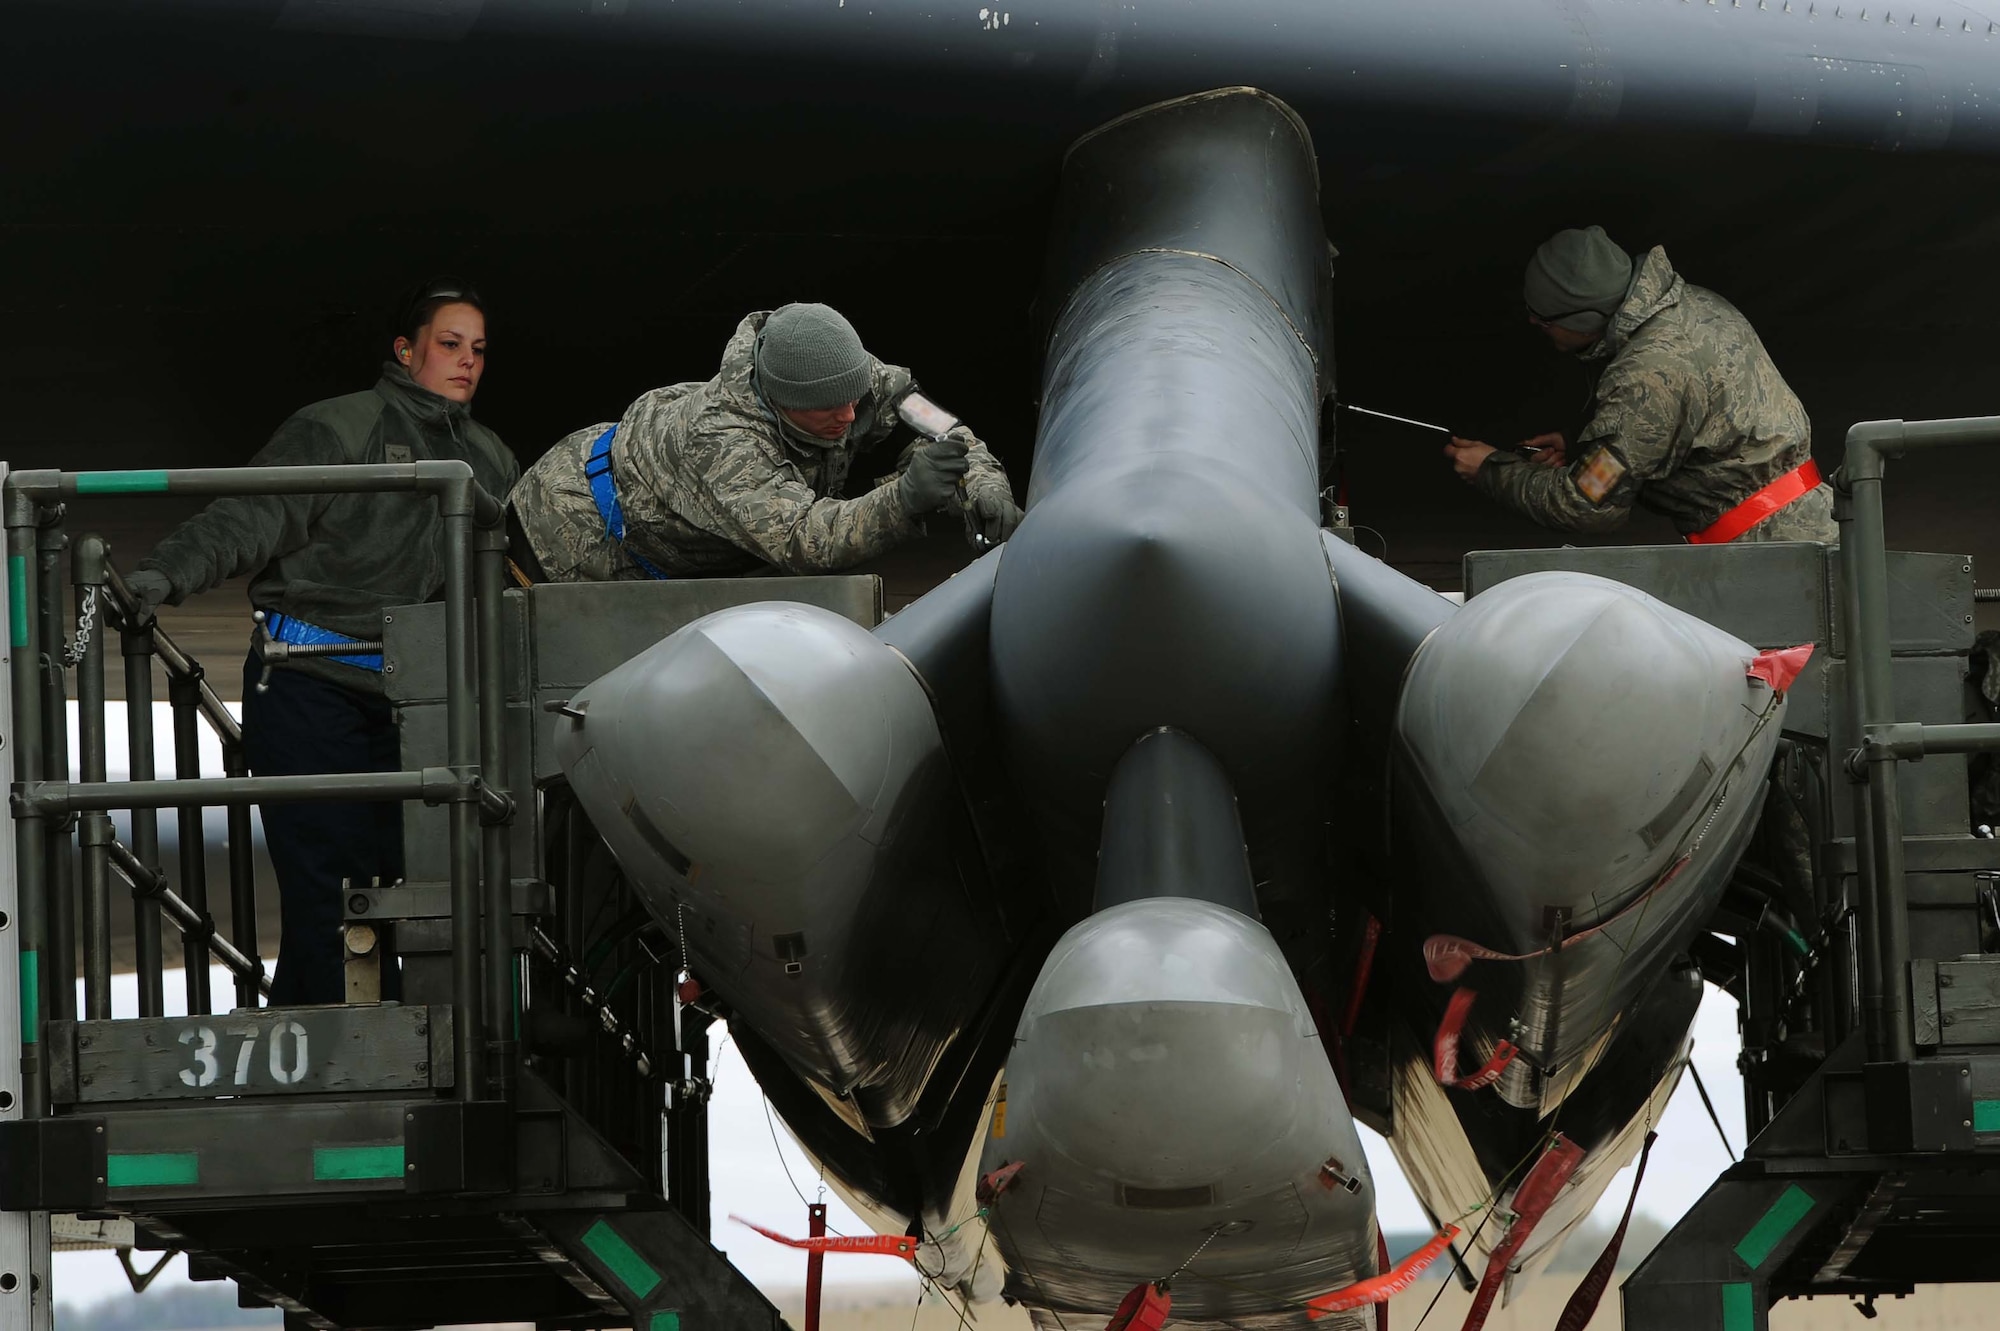 Airmen from the 2nd Aircraft Maintenance Squadron load weapons onto a B-52H Stratofortress during an exercise on Minot Air Force Base, N.D., May 7, 2015. The exercise provided training opportunities for forces to deter and, if necessary, defeat a military attack against the U.S. (U.S. Air Force photo/Senior Airman Kristoffer Kaubisch)